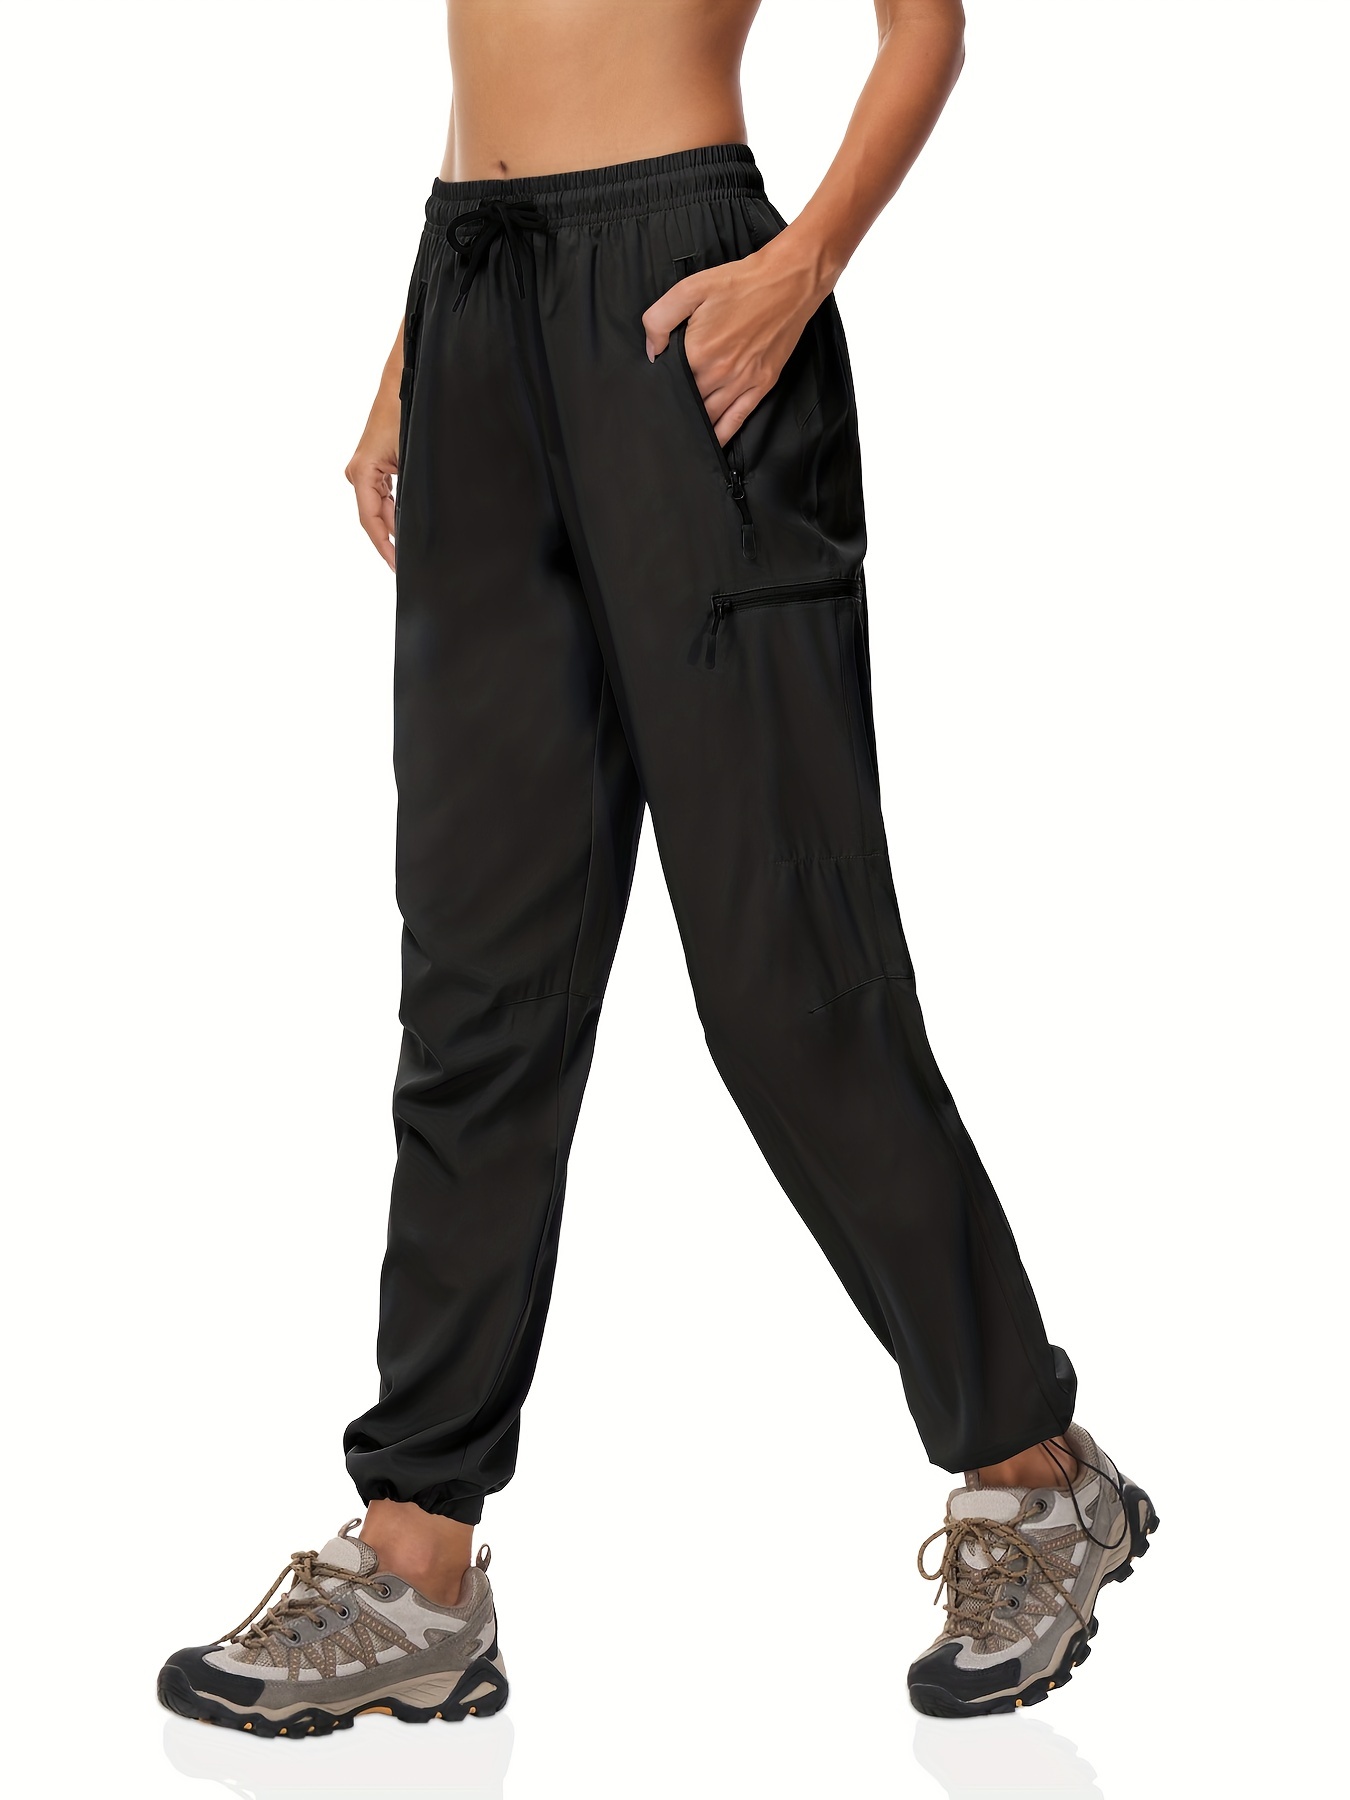 Women's Solid Color Outdoor Pants, Weaving Quick-Dry Lightweight Hiking Jogger Pants,Temu